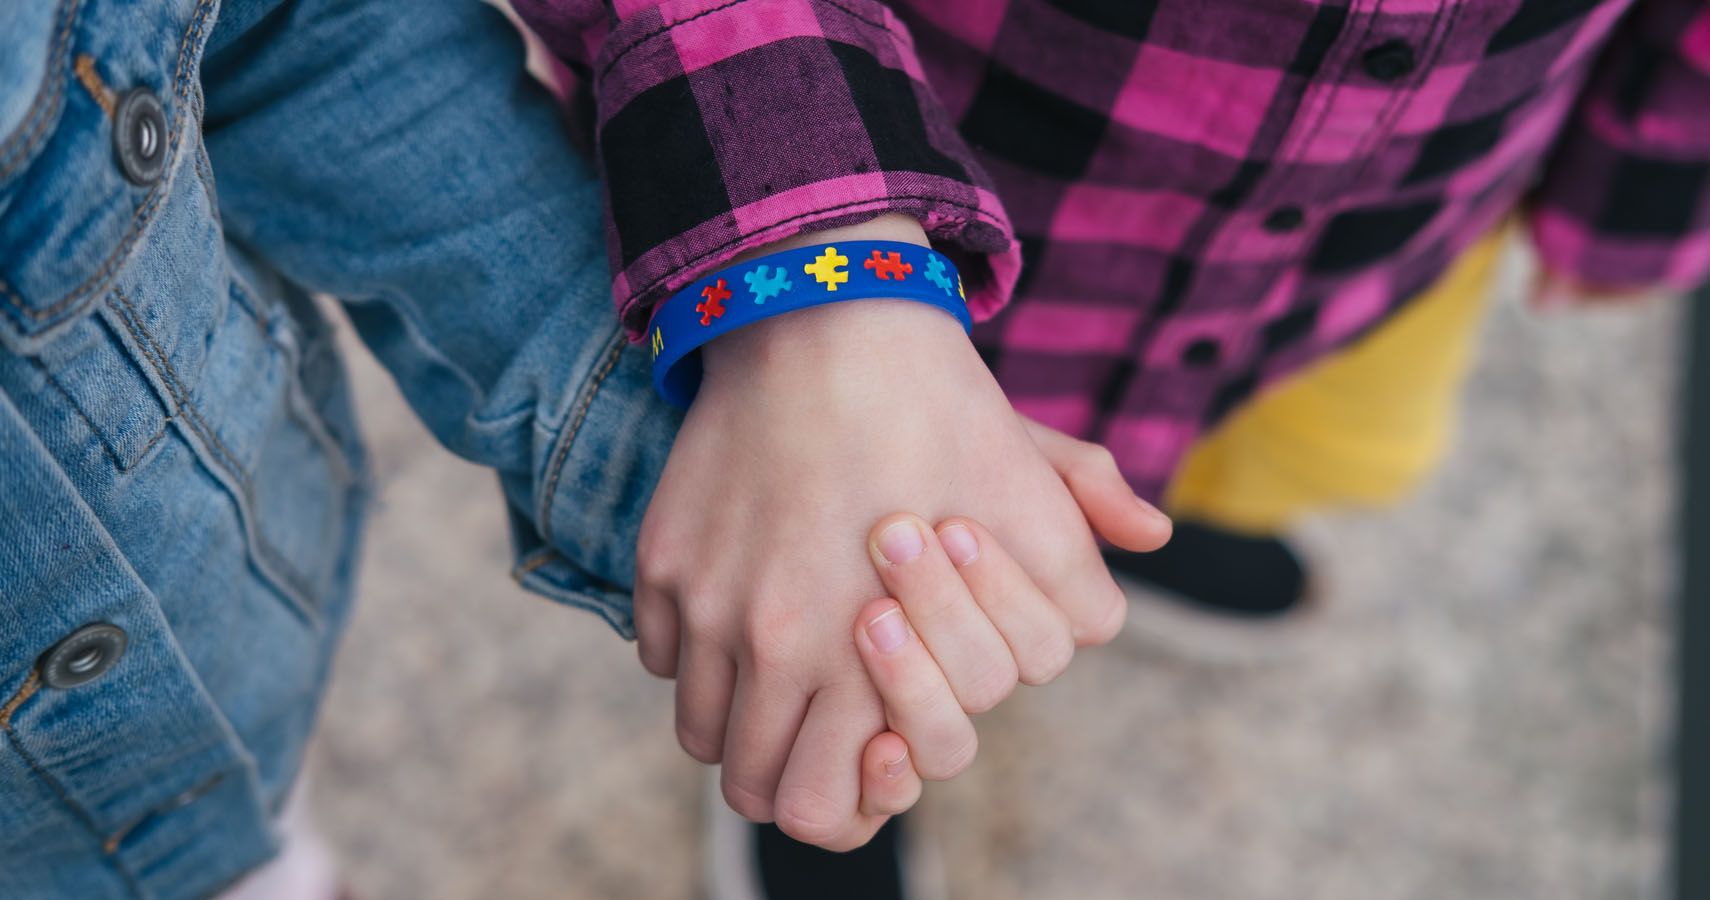 The Importance Of Medical Alert Bracelets For Children With Autism